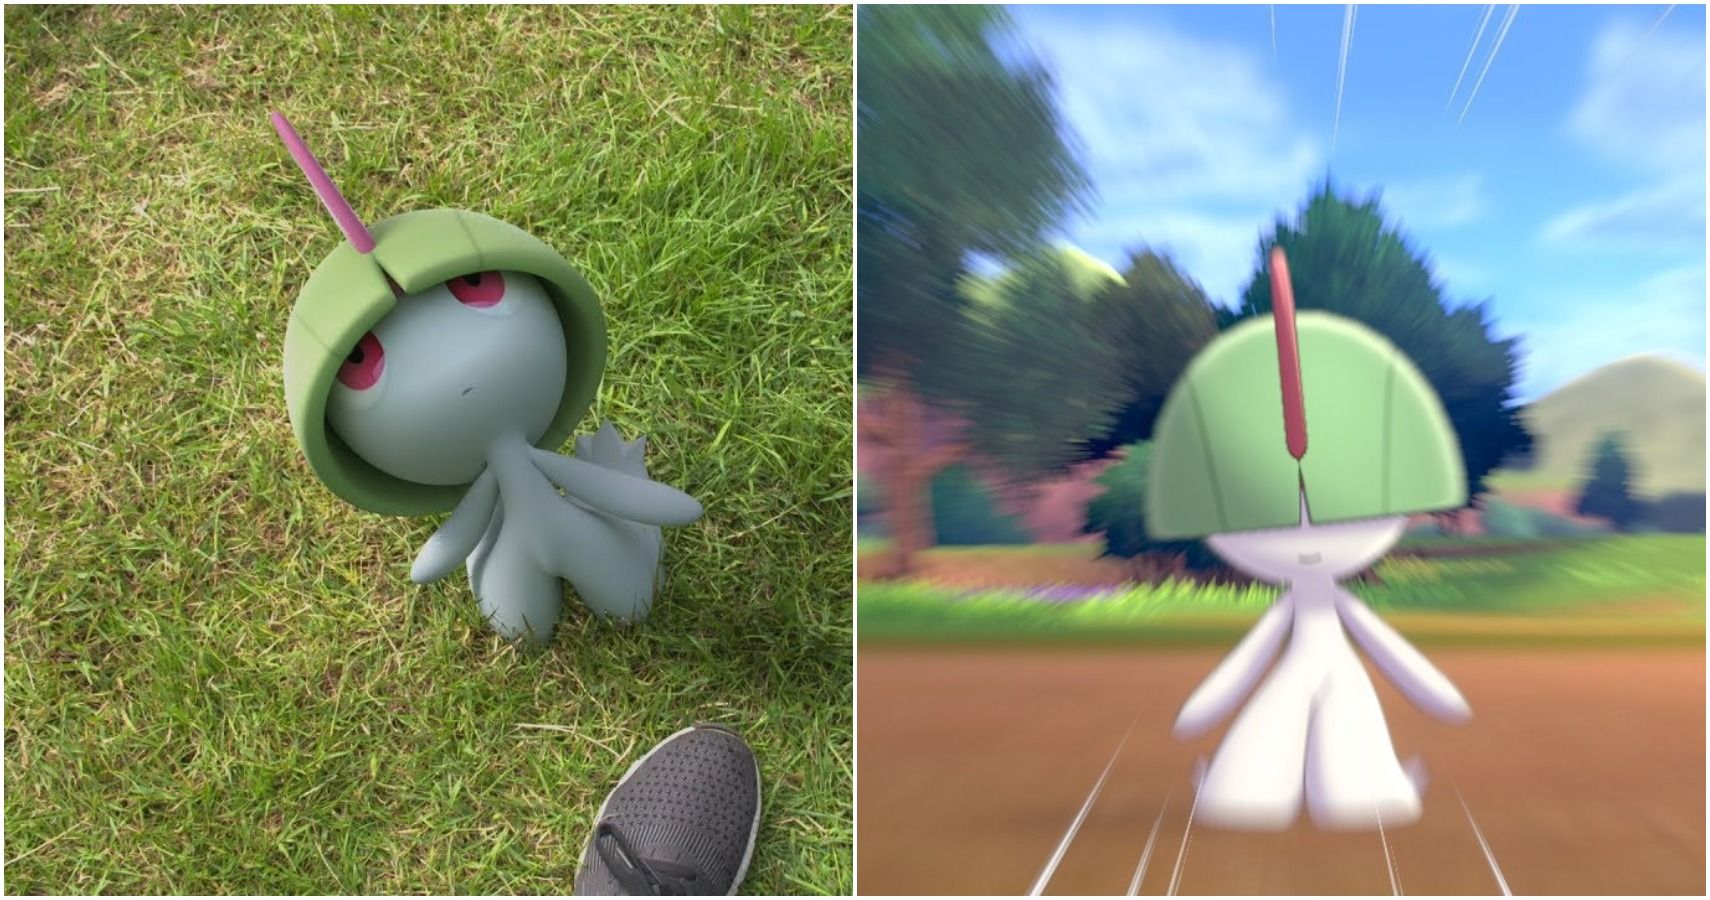 Pokemon GO Shiny Ralts Guide: How To Catch Shiny Ralts And Evolve into Shiny  Kirila, Gallade And Gardevoir